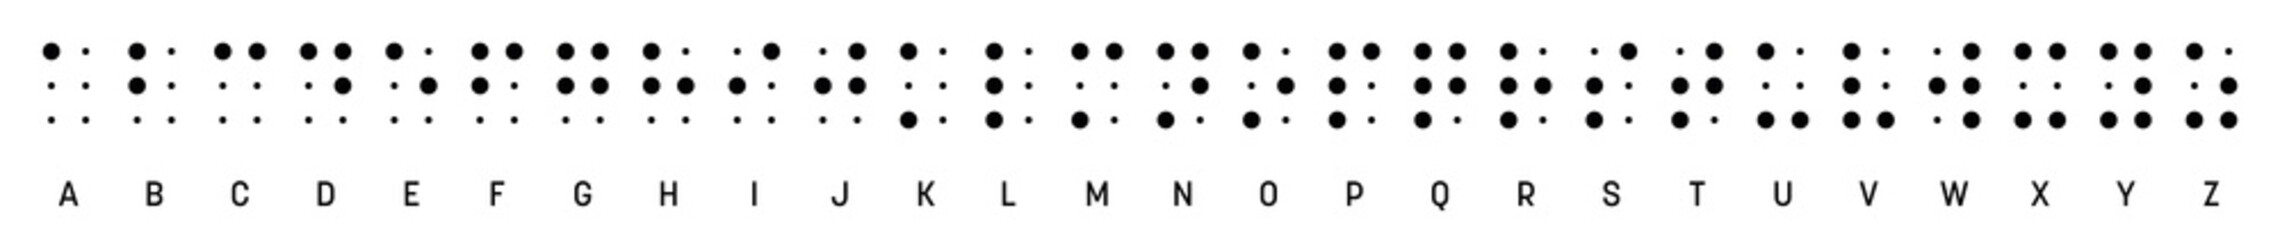 Braille alphabet letters in a row. Braille is a tactile writing system used by blind or visually impaired people. Vector illustration in black and white